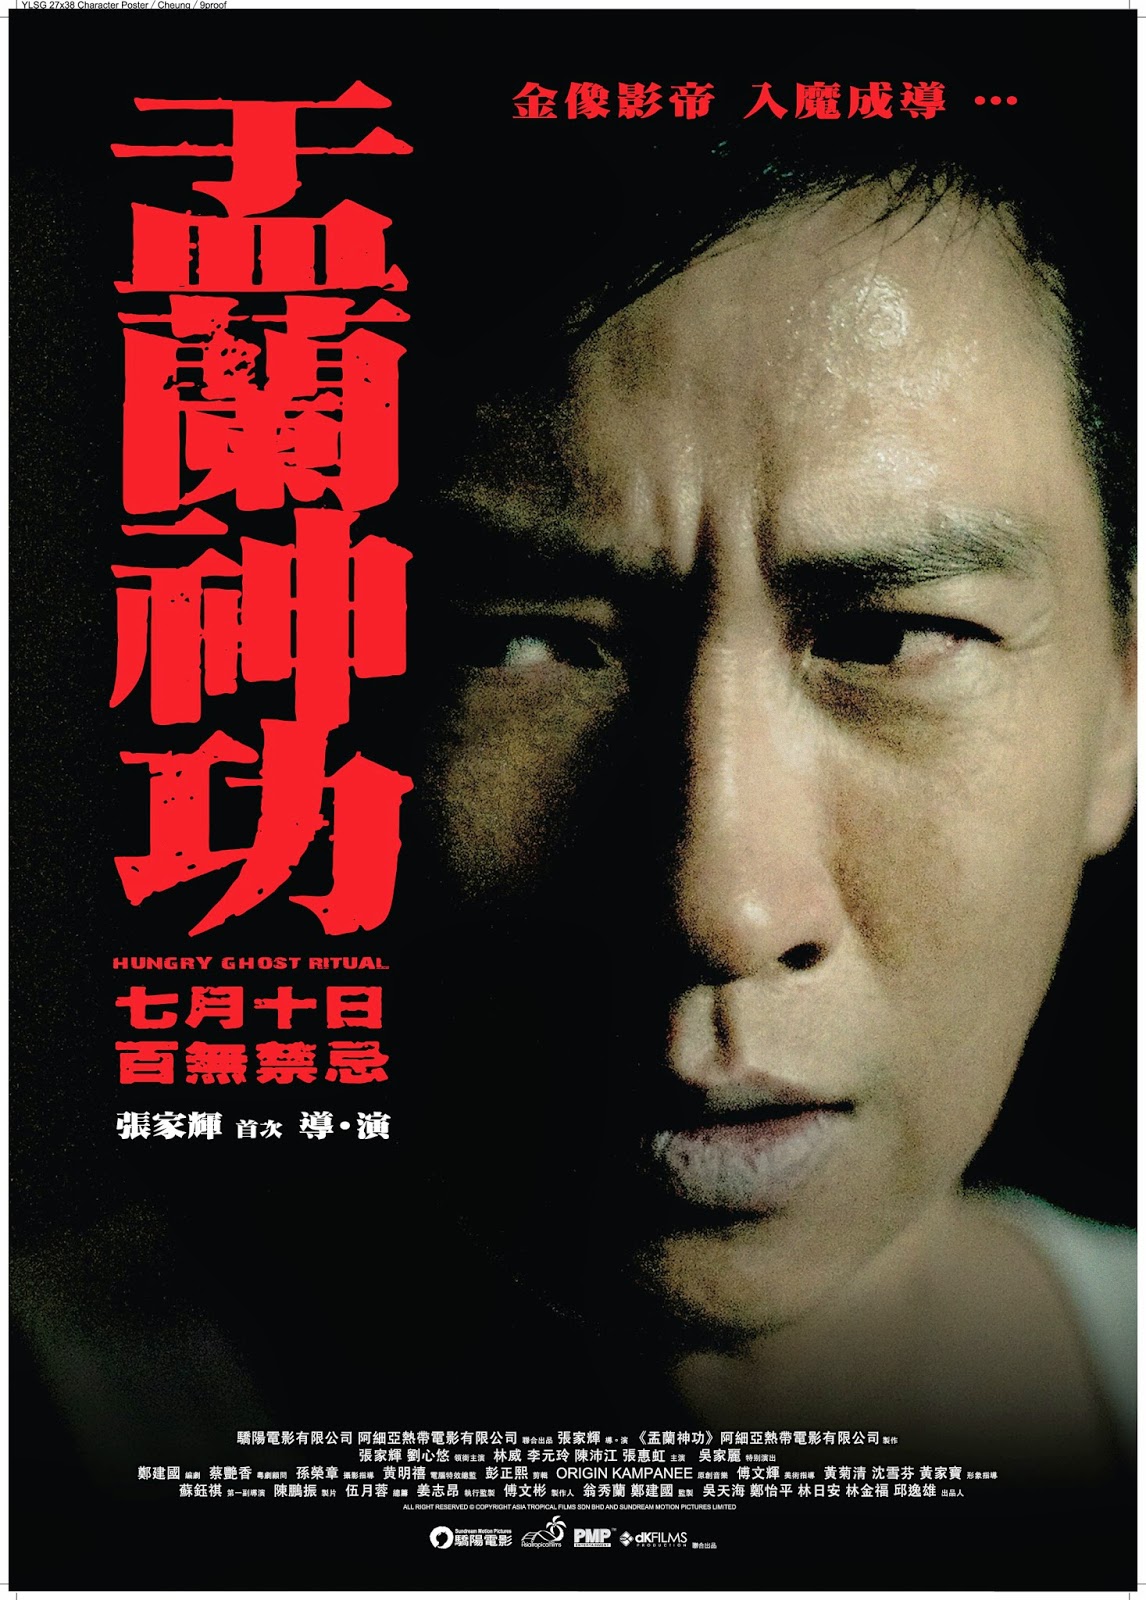 [Upcoming Movie] “Hungry Ghost Ritual盂蘭神功”  Will Be In Malaysia Cinema 10th July 2014! Malaysia Gala Premiere On 26th June 2014!